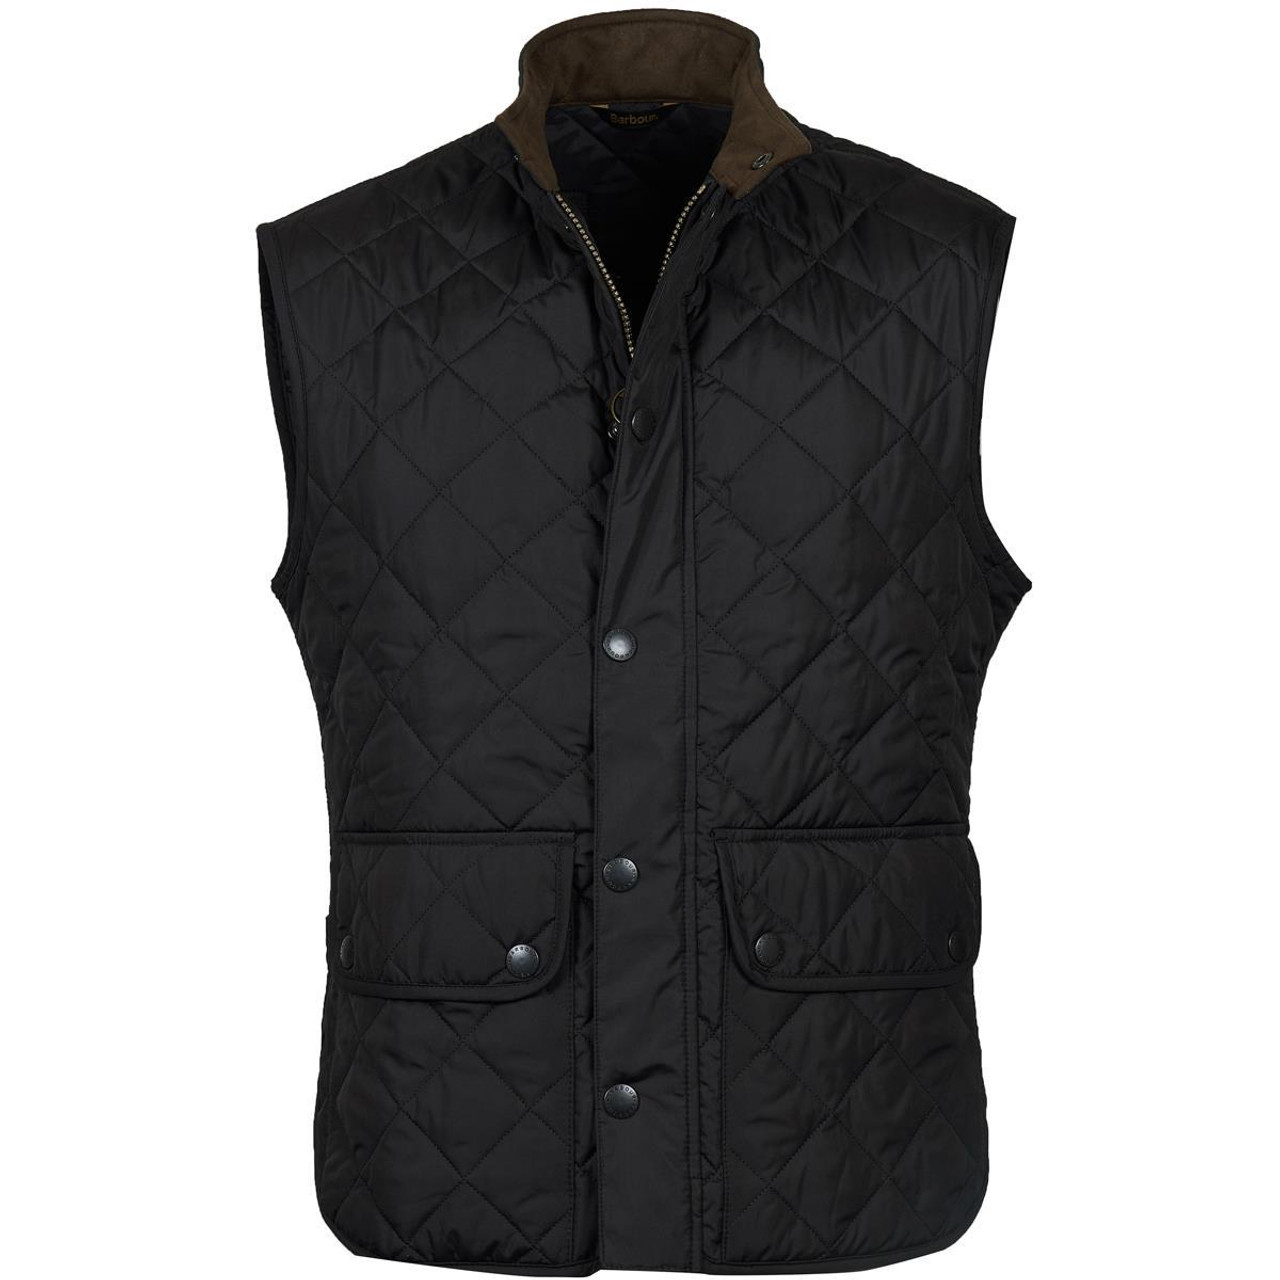 Is the Barbour Lowerdale Gilet adjustable?